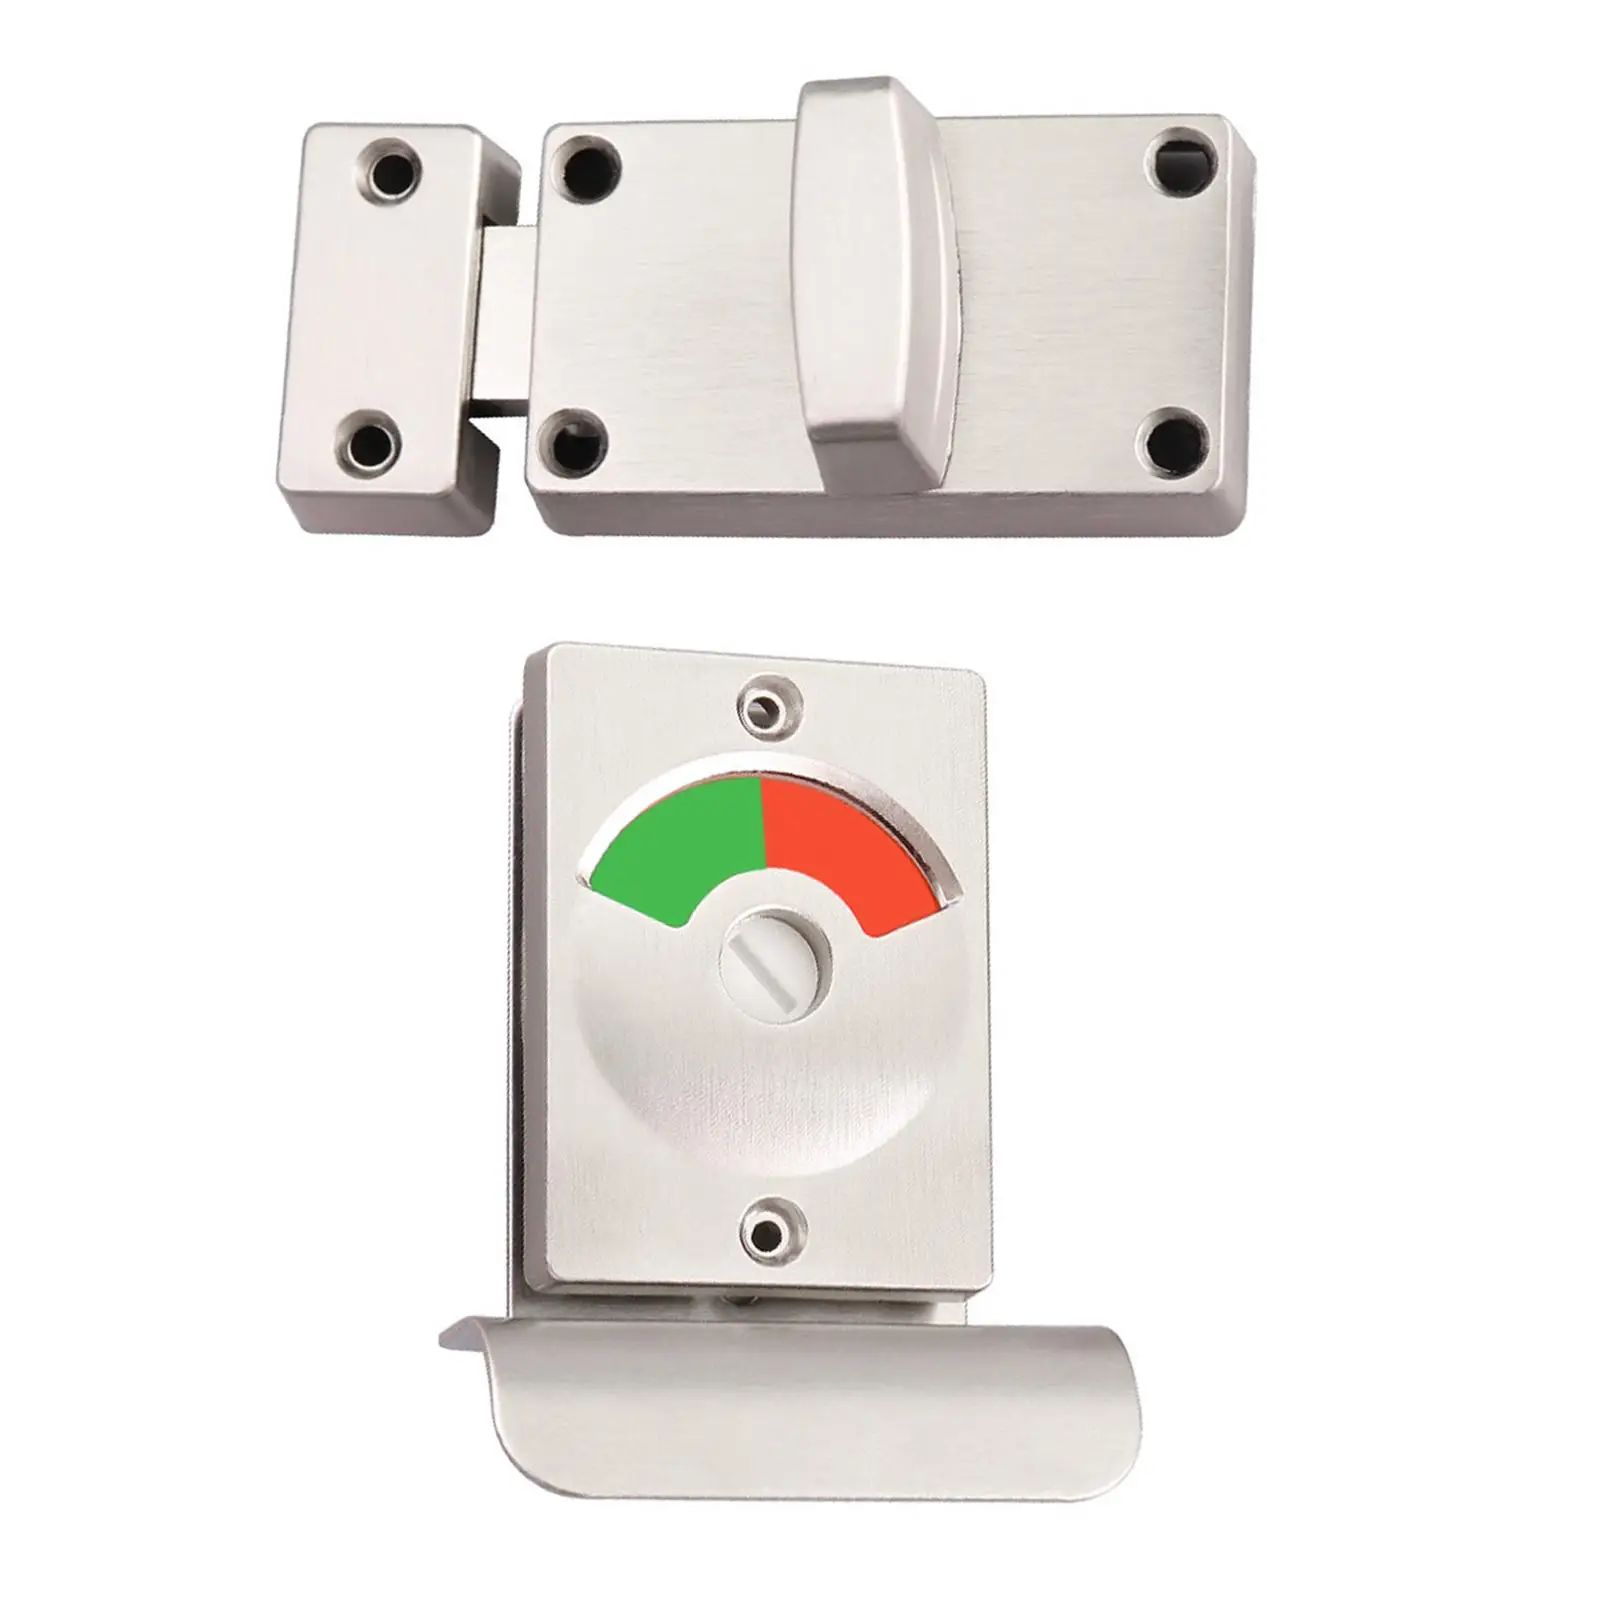 Green And Red Indicator Lock Inuse Or Vacant Lock for Office